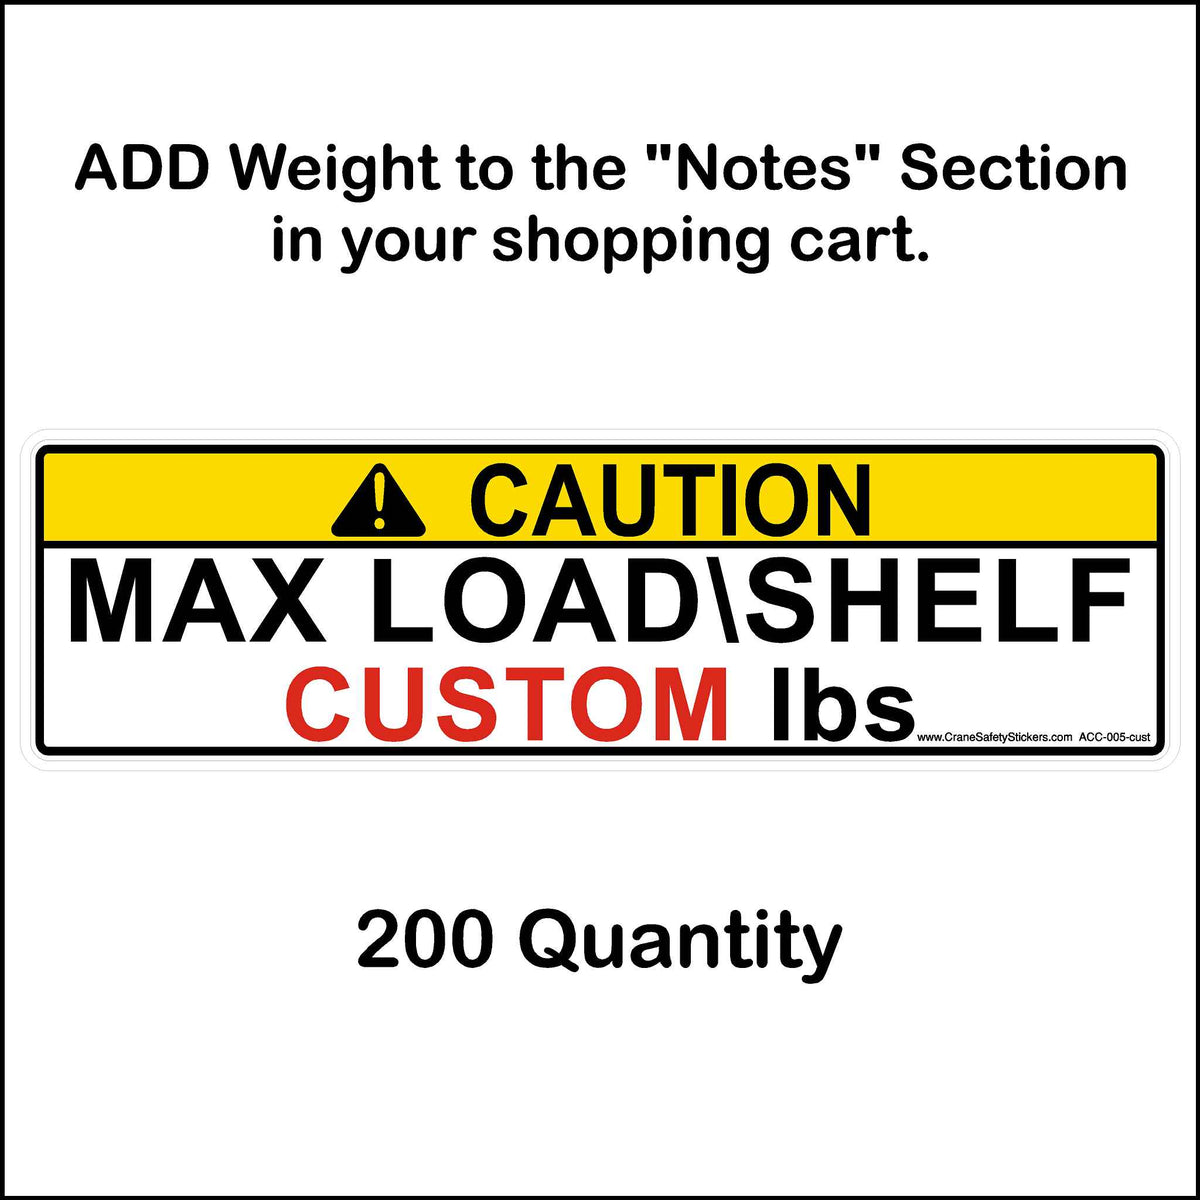 Custom, add your own weight to this maximum load shelf pallet rack label 200 quantity.